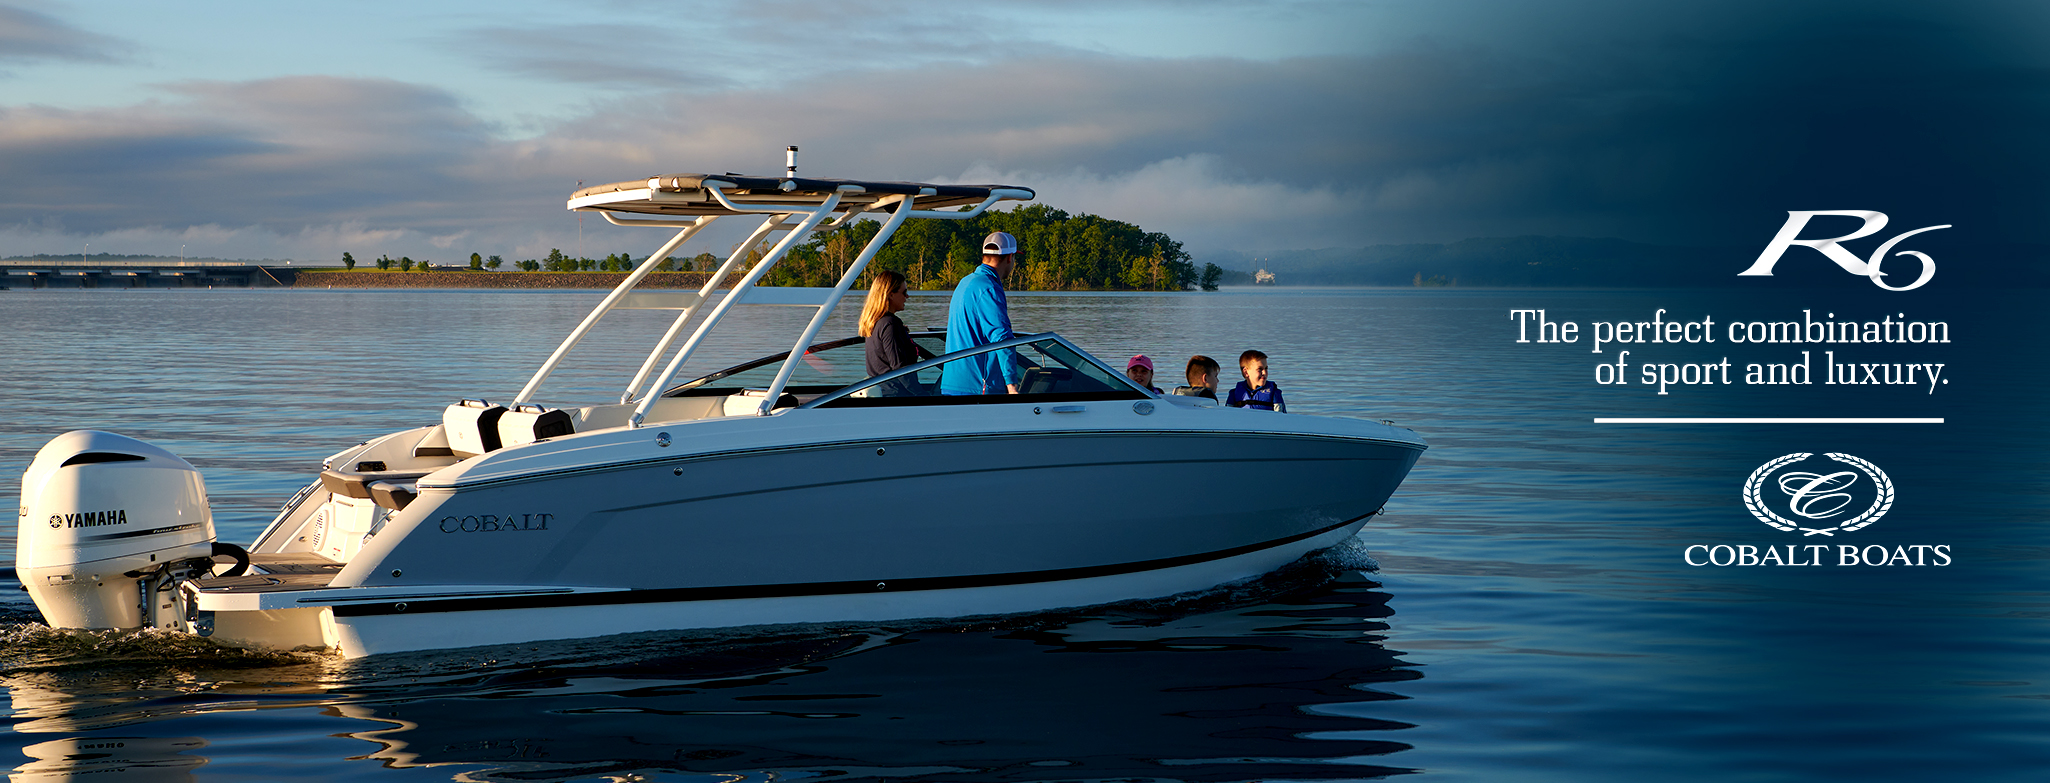 The new 2022 Cobalt Boats are available at Marine Connection West Palm Beach Miami Vero Beach Fort Lauderdale Islamorada and Stuart!